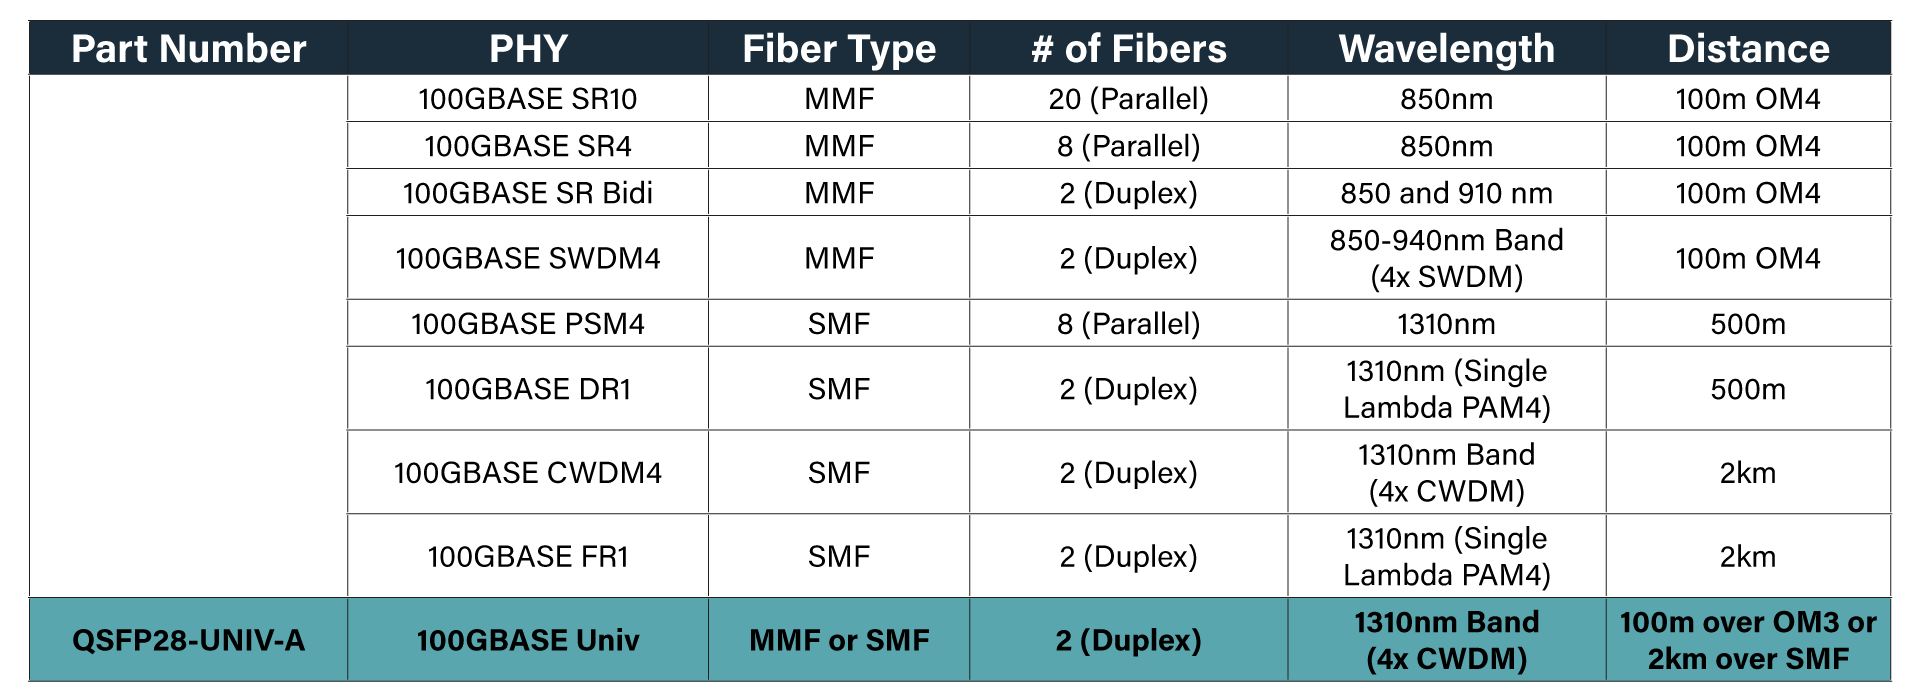 Optical transceivers table showing suitable items for 100G networking in the data center.